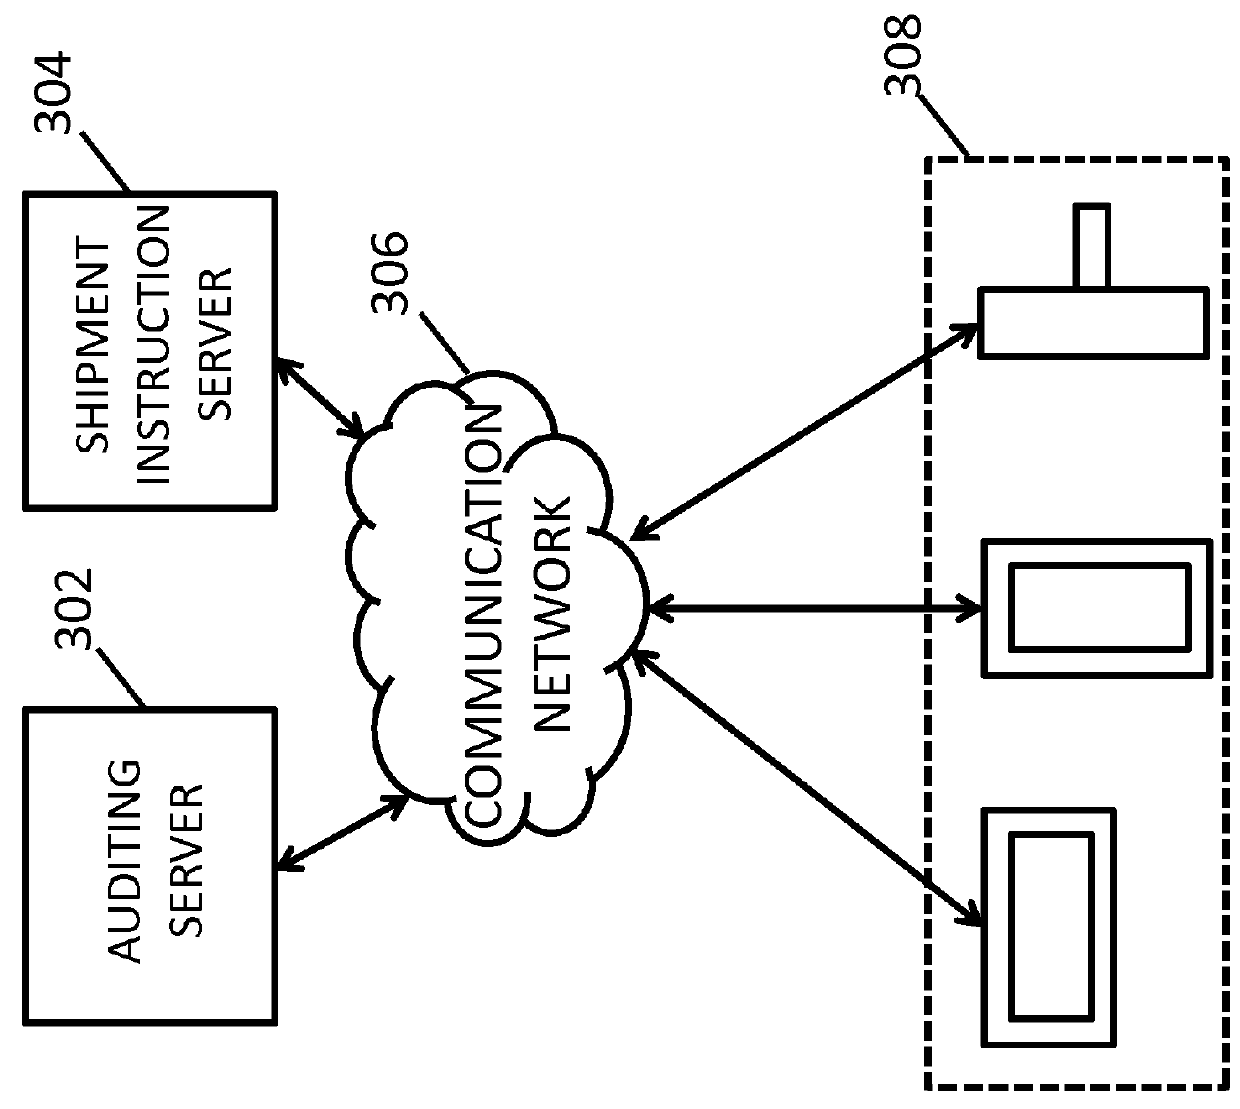 Devices, systems and methods for tracking and auditing shipment items